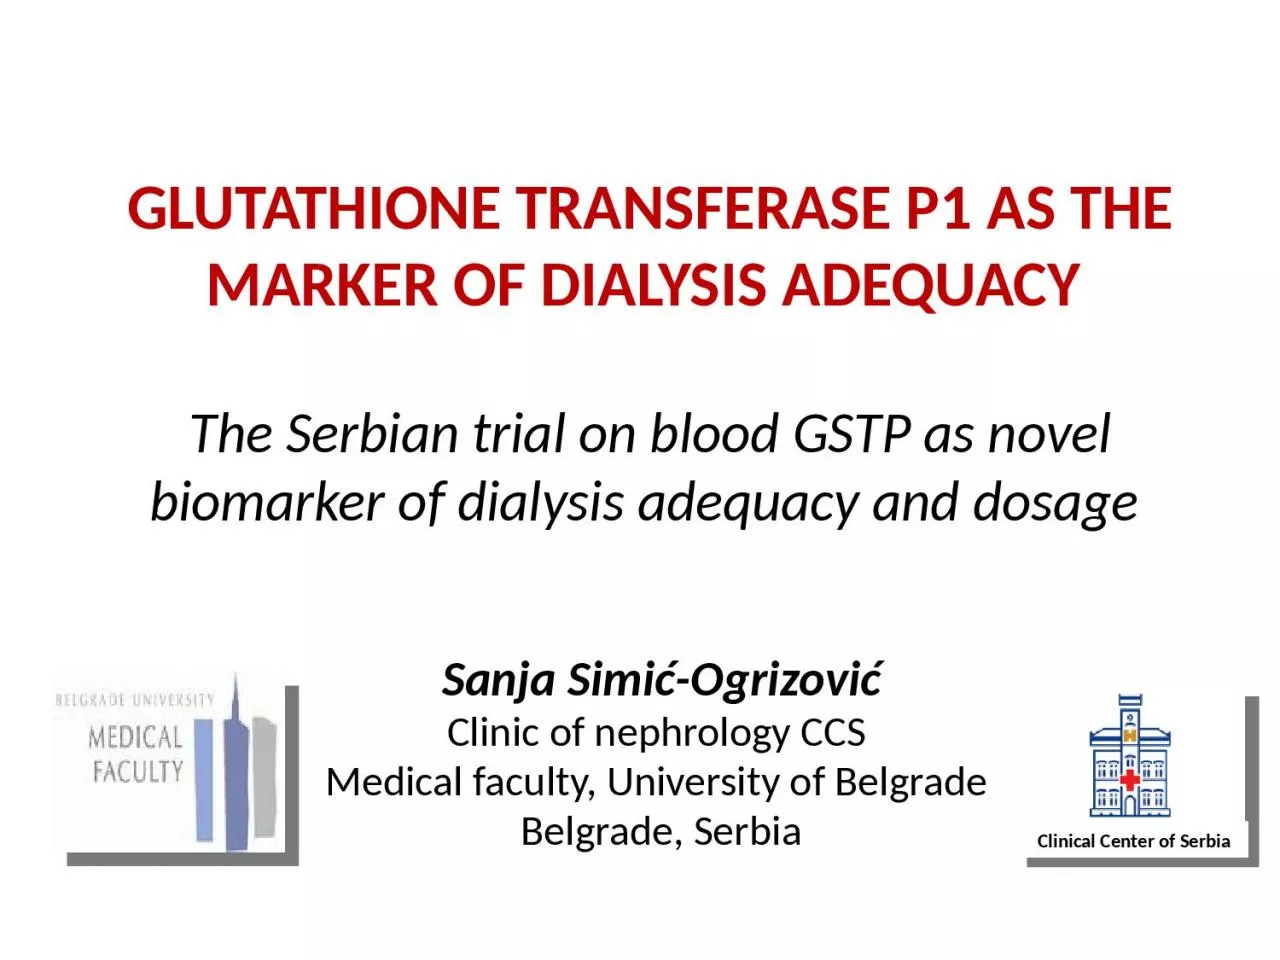 GLUTATHIONE TRANSFERASE P1 AS THE MARKER OF DIALYSIS ADEQUACY